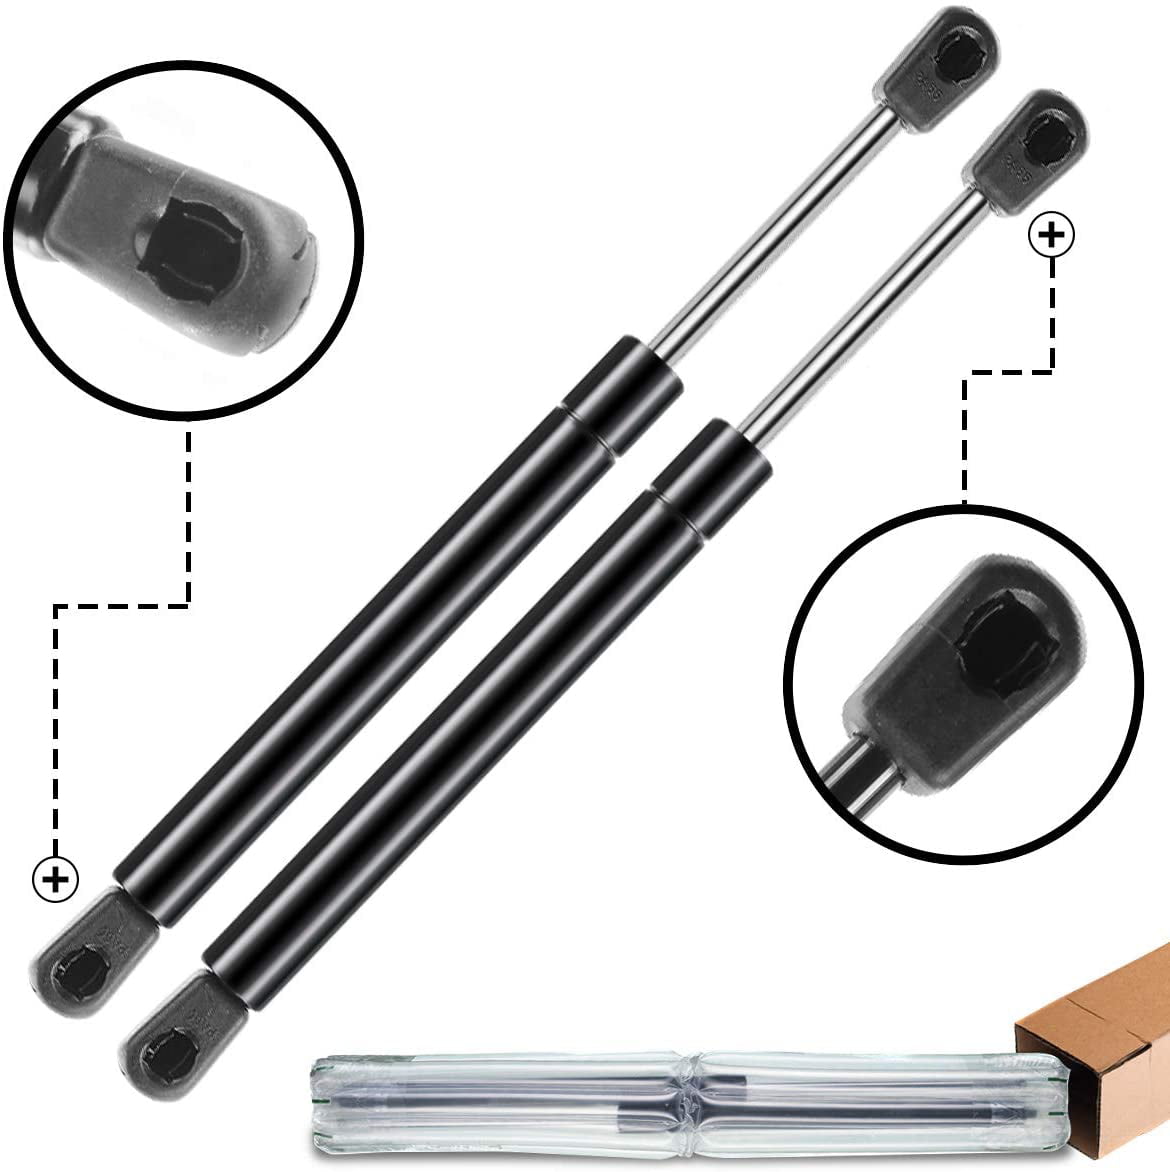 A-Premium Tailgate Rear Hatch Lift Supports Shock Struts Springs for Jeep Commander 2006-2010 2-PC Set